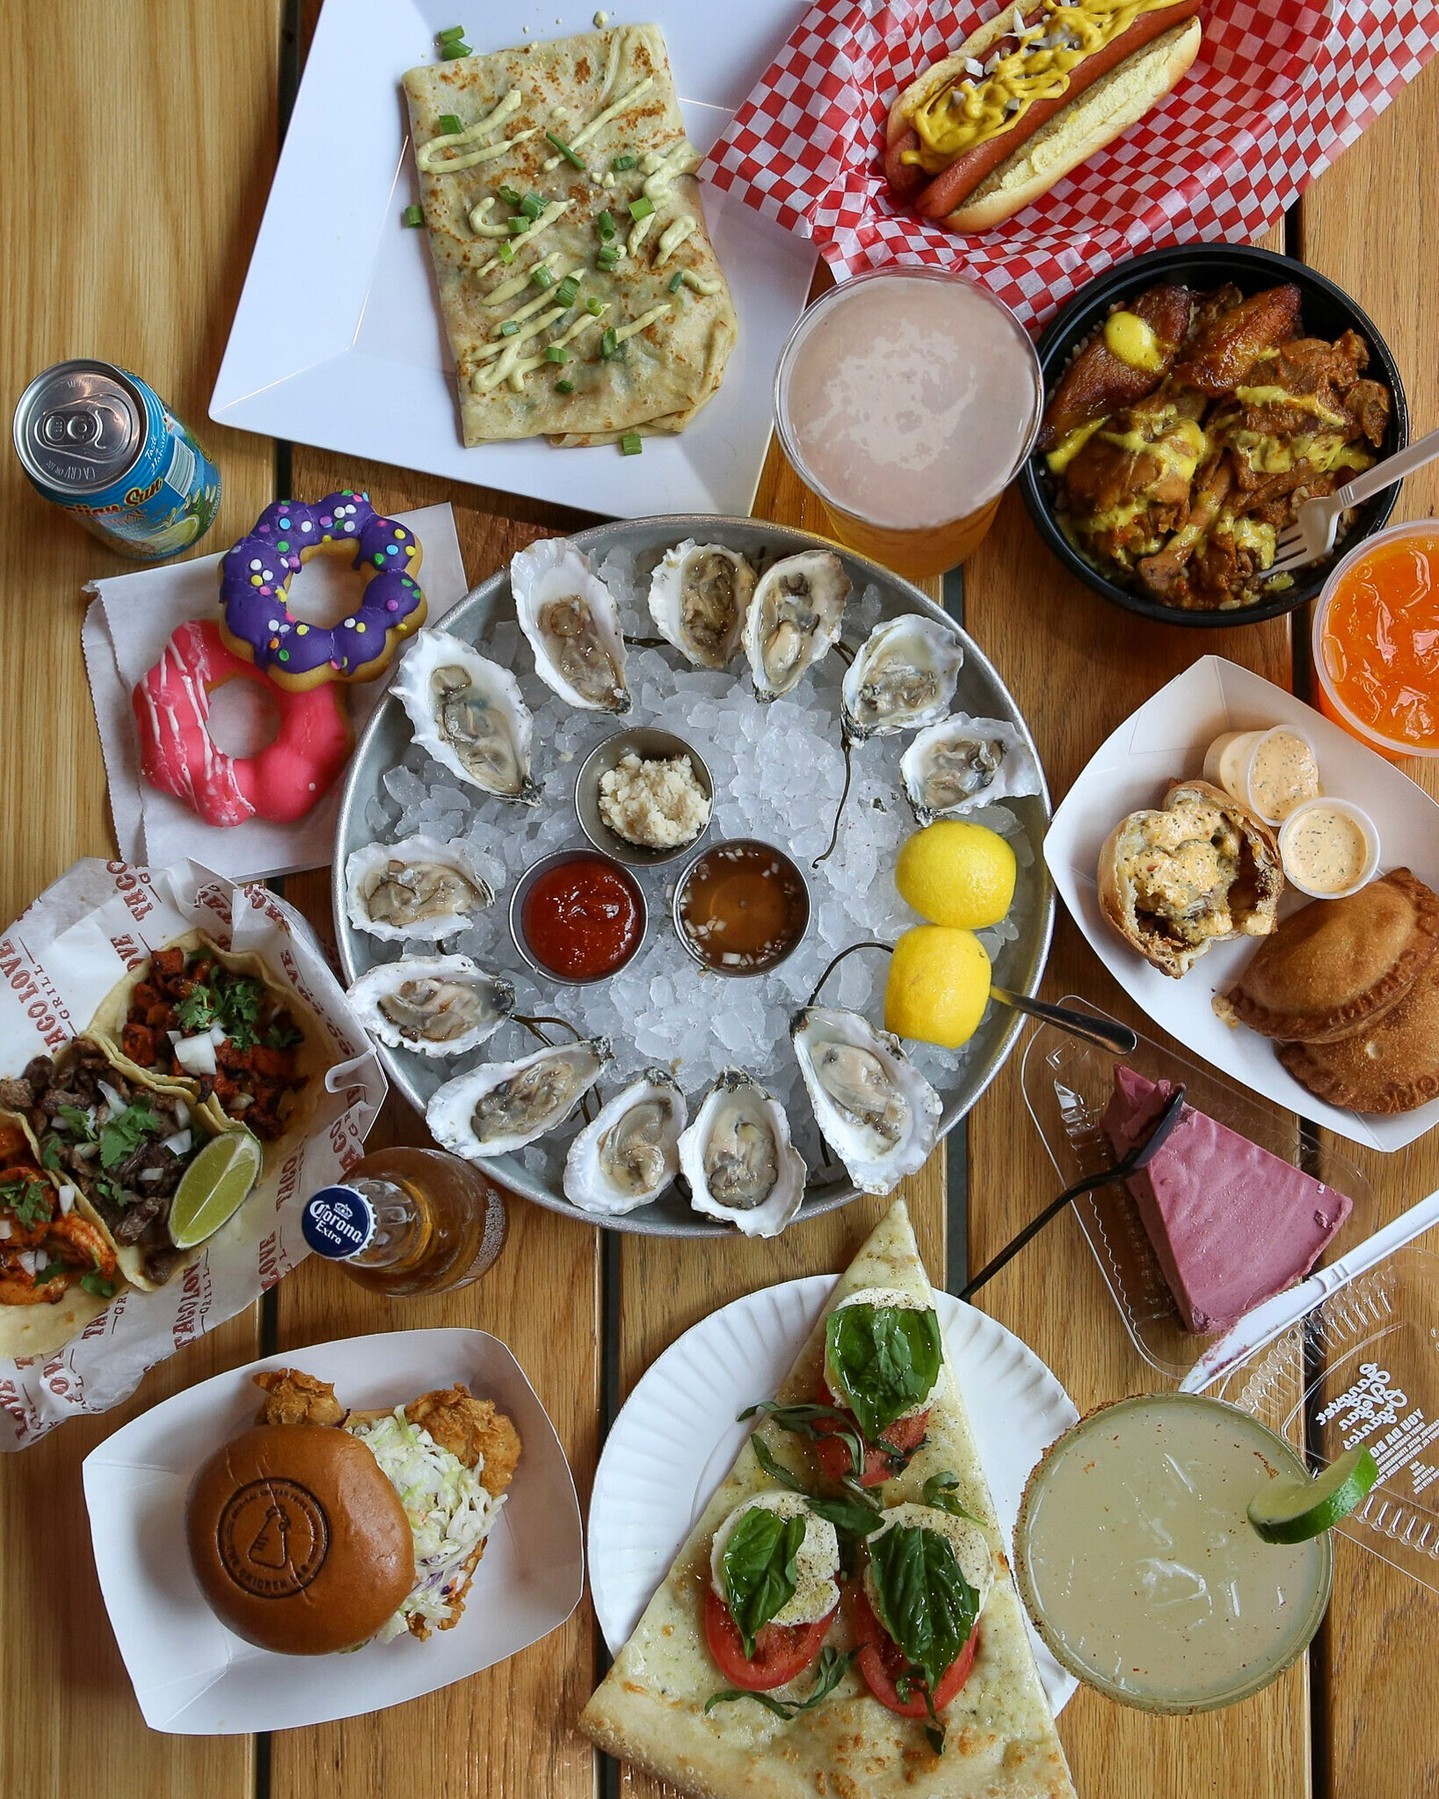 A top down view of many foods from different vendors on a table, including seafood, pizza, a burger, donuts, drinks, tacos, a hot dog, and cake